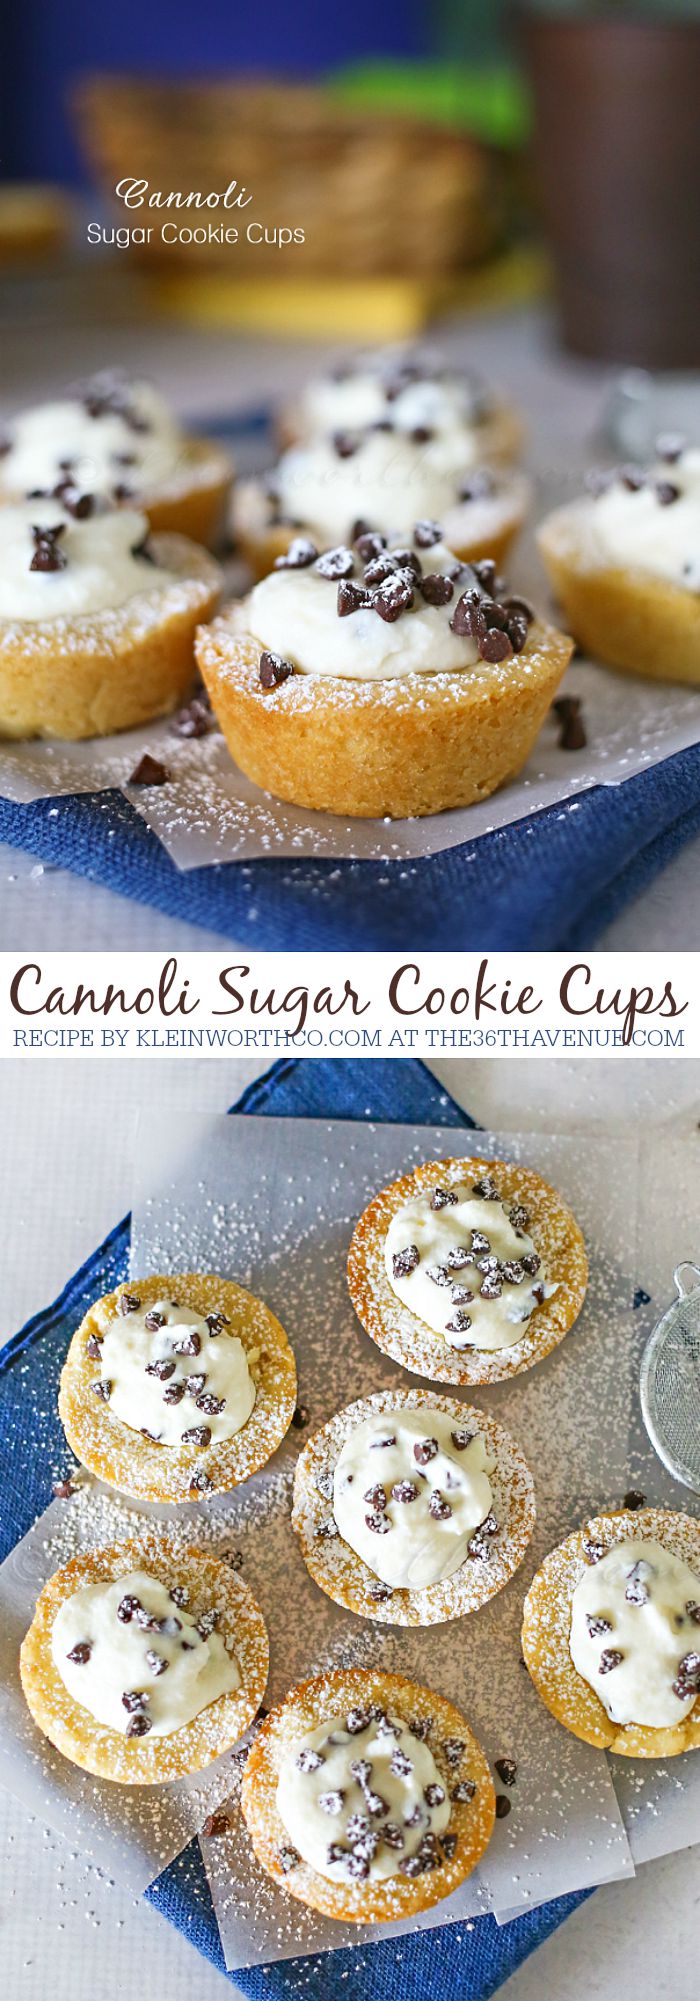 Cannoli Sugar Cookie Cups at the36thavenue.com